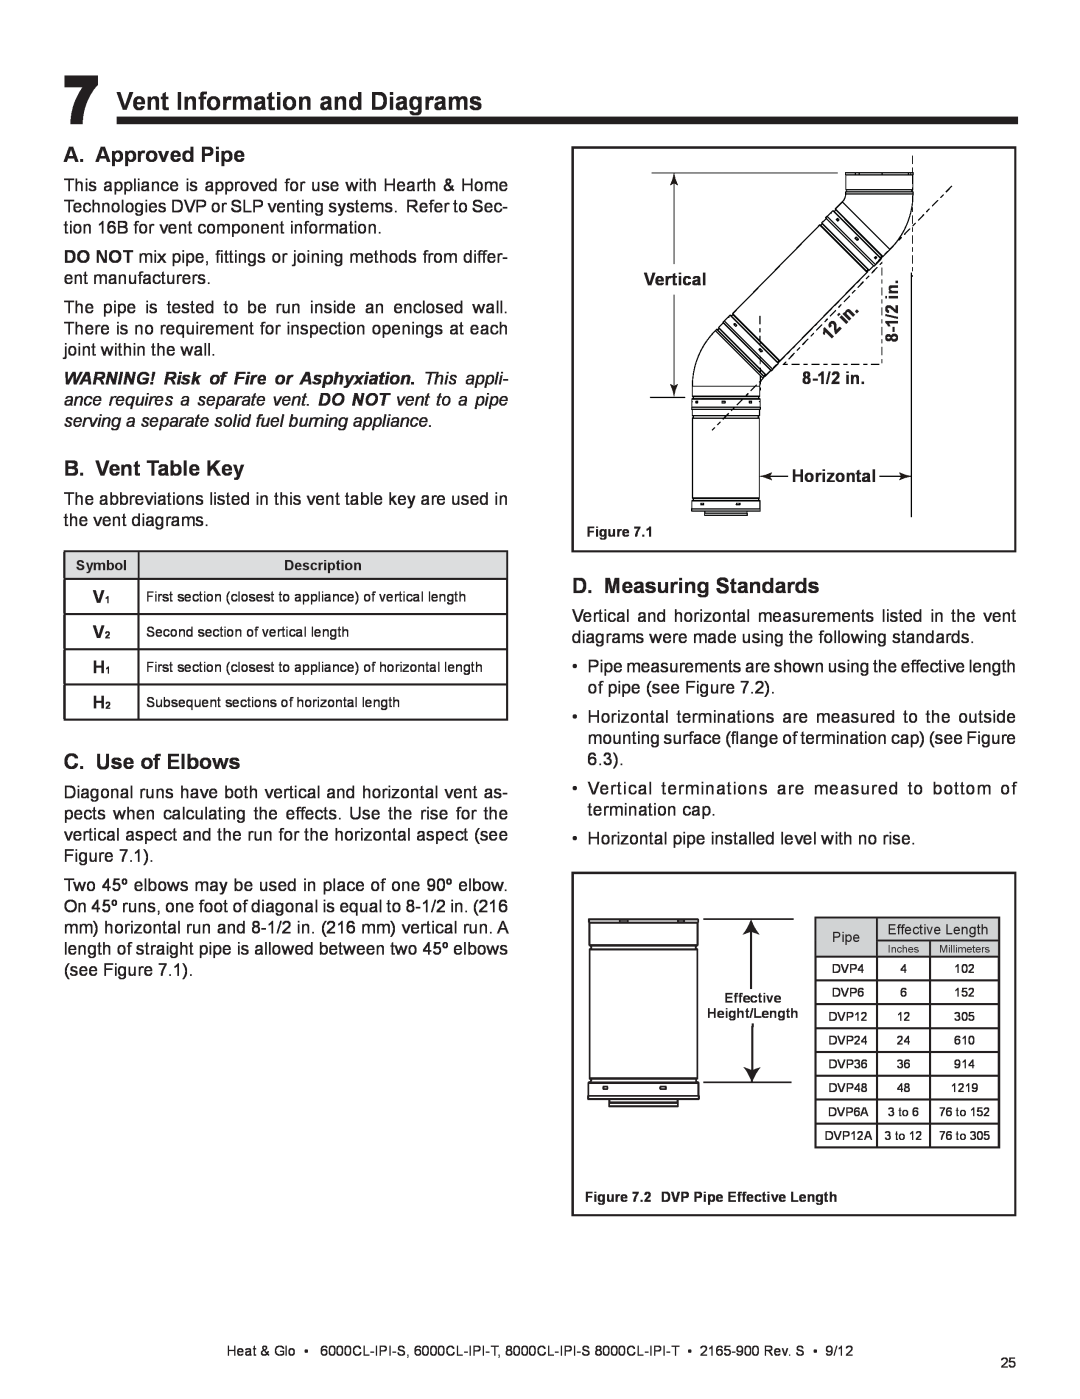 Heat & Glo LifeStyle 8000CL-IPI-T Vent Information and Diagrams, A. Approved Pipe, B. Vent Table Key, C. Use of Elbows 